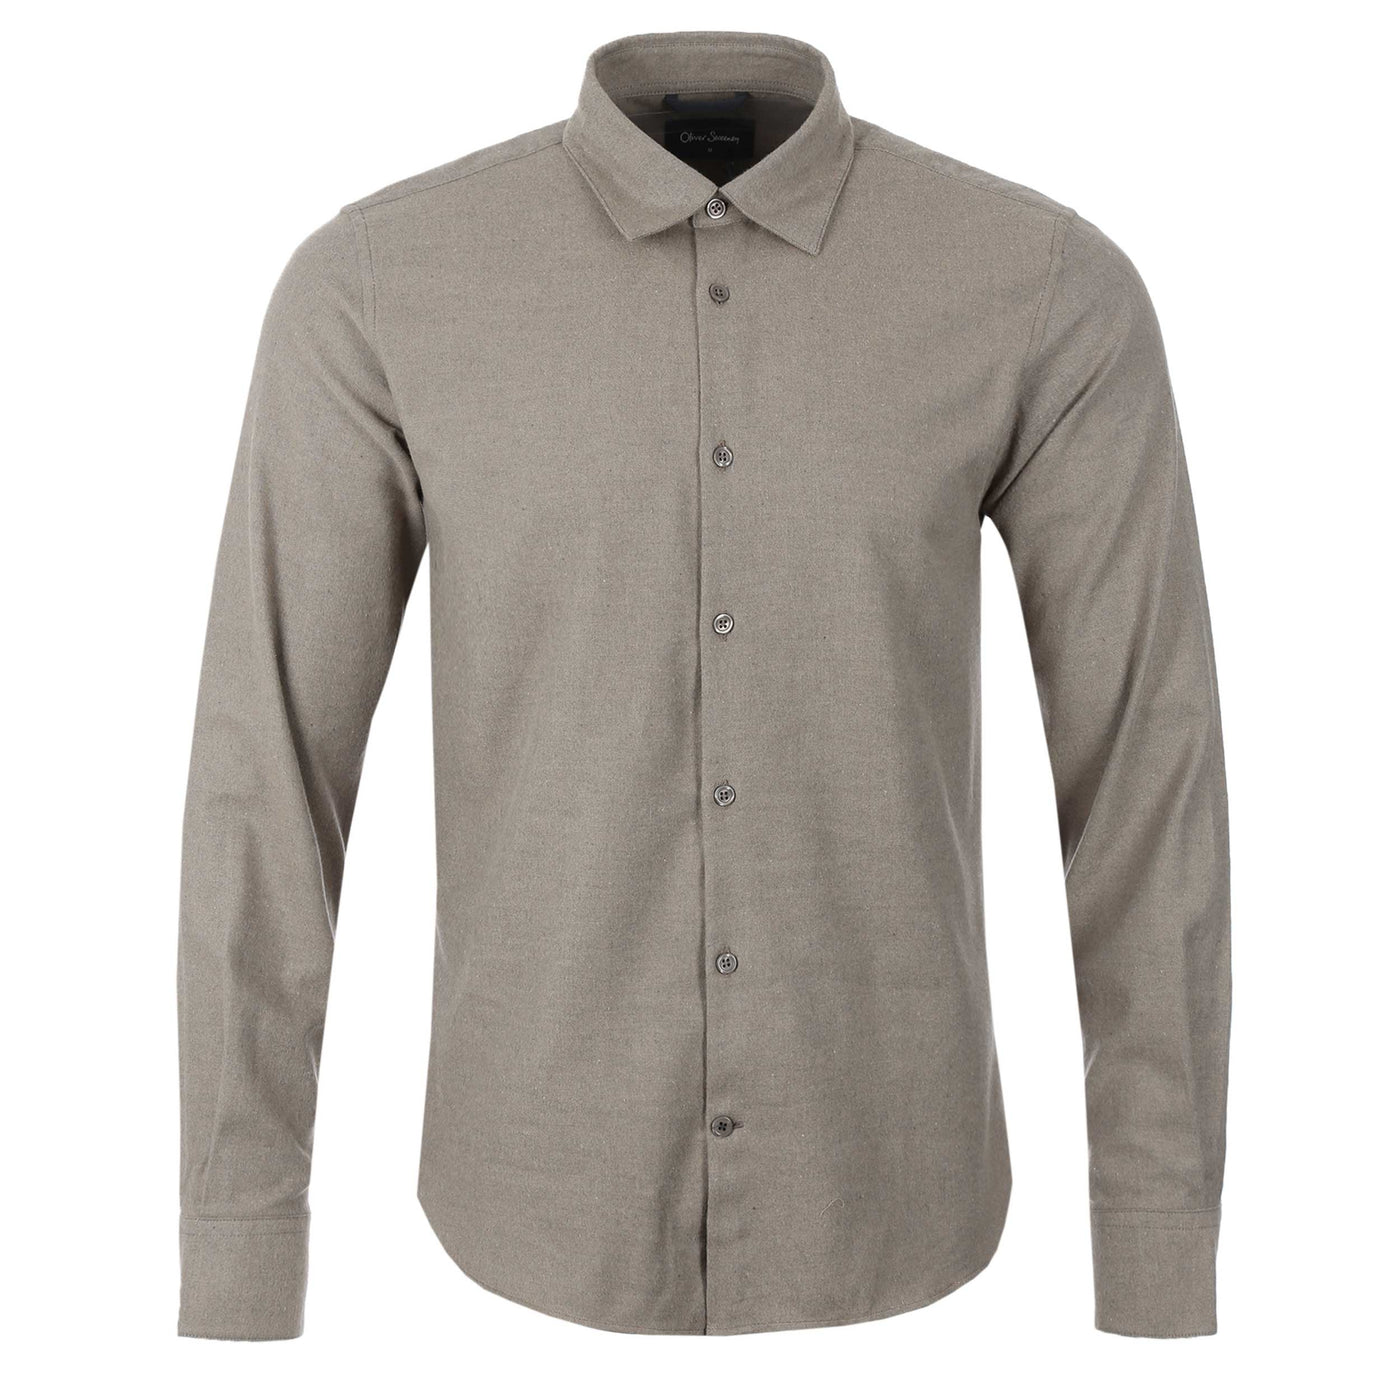 Oliver Sweeney Hawkesworth Shirt in Taupe